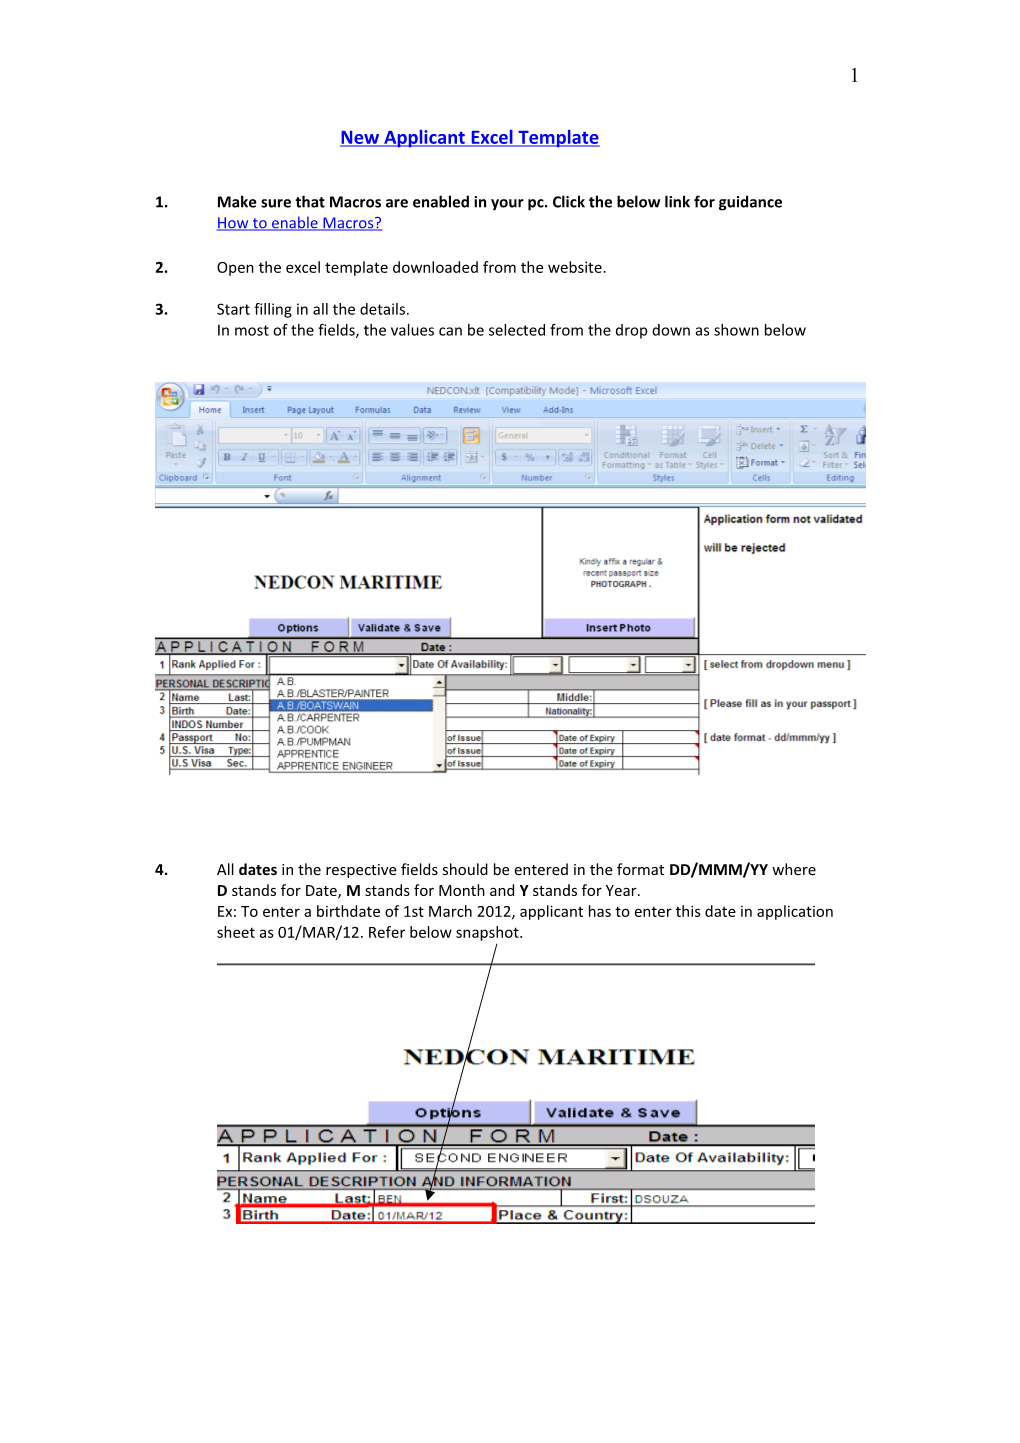 New Applicant Excel Template